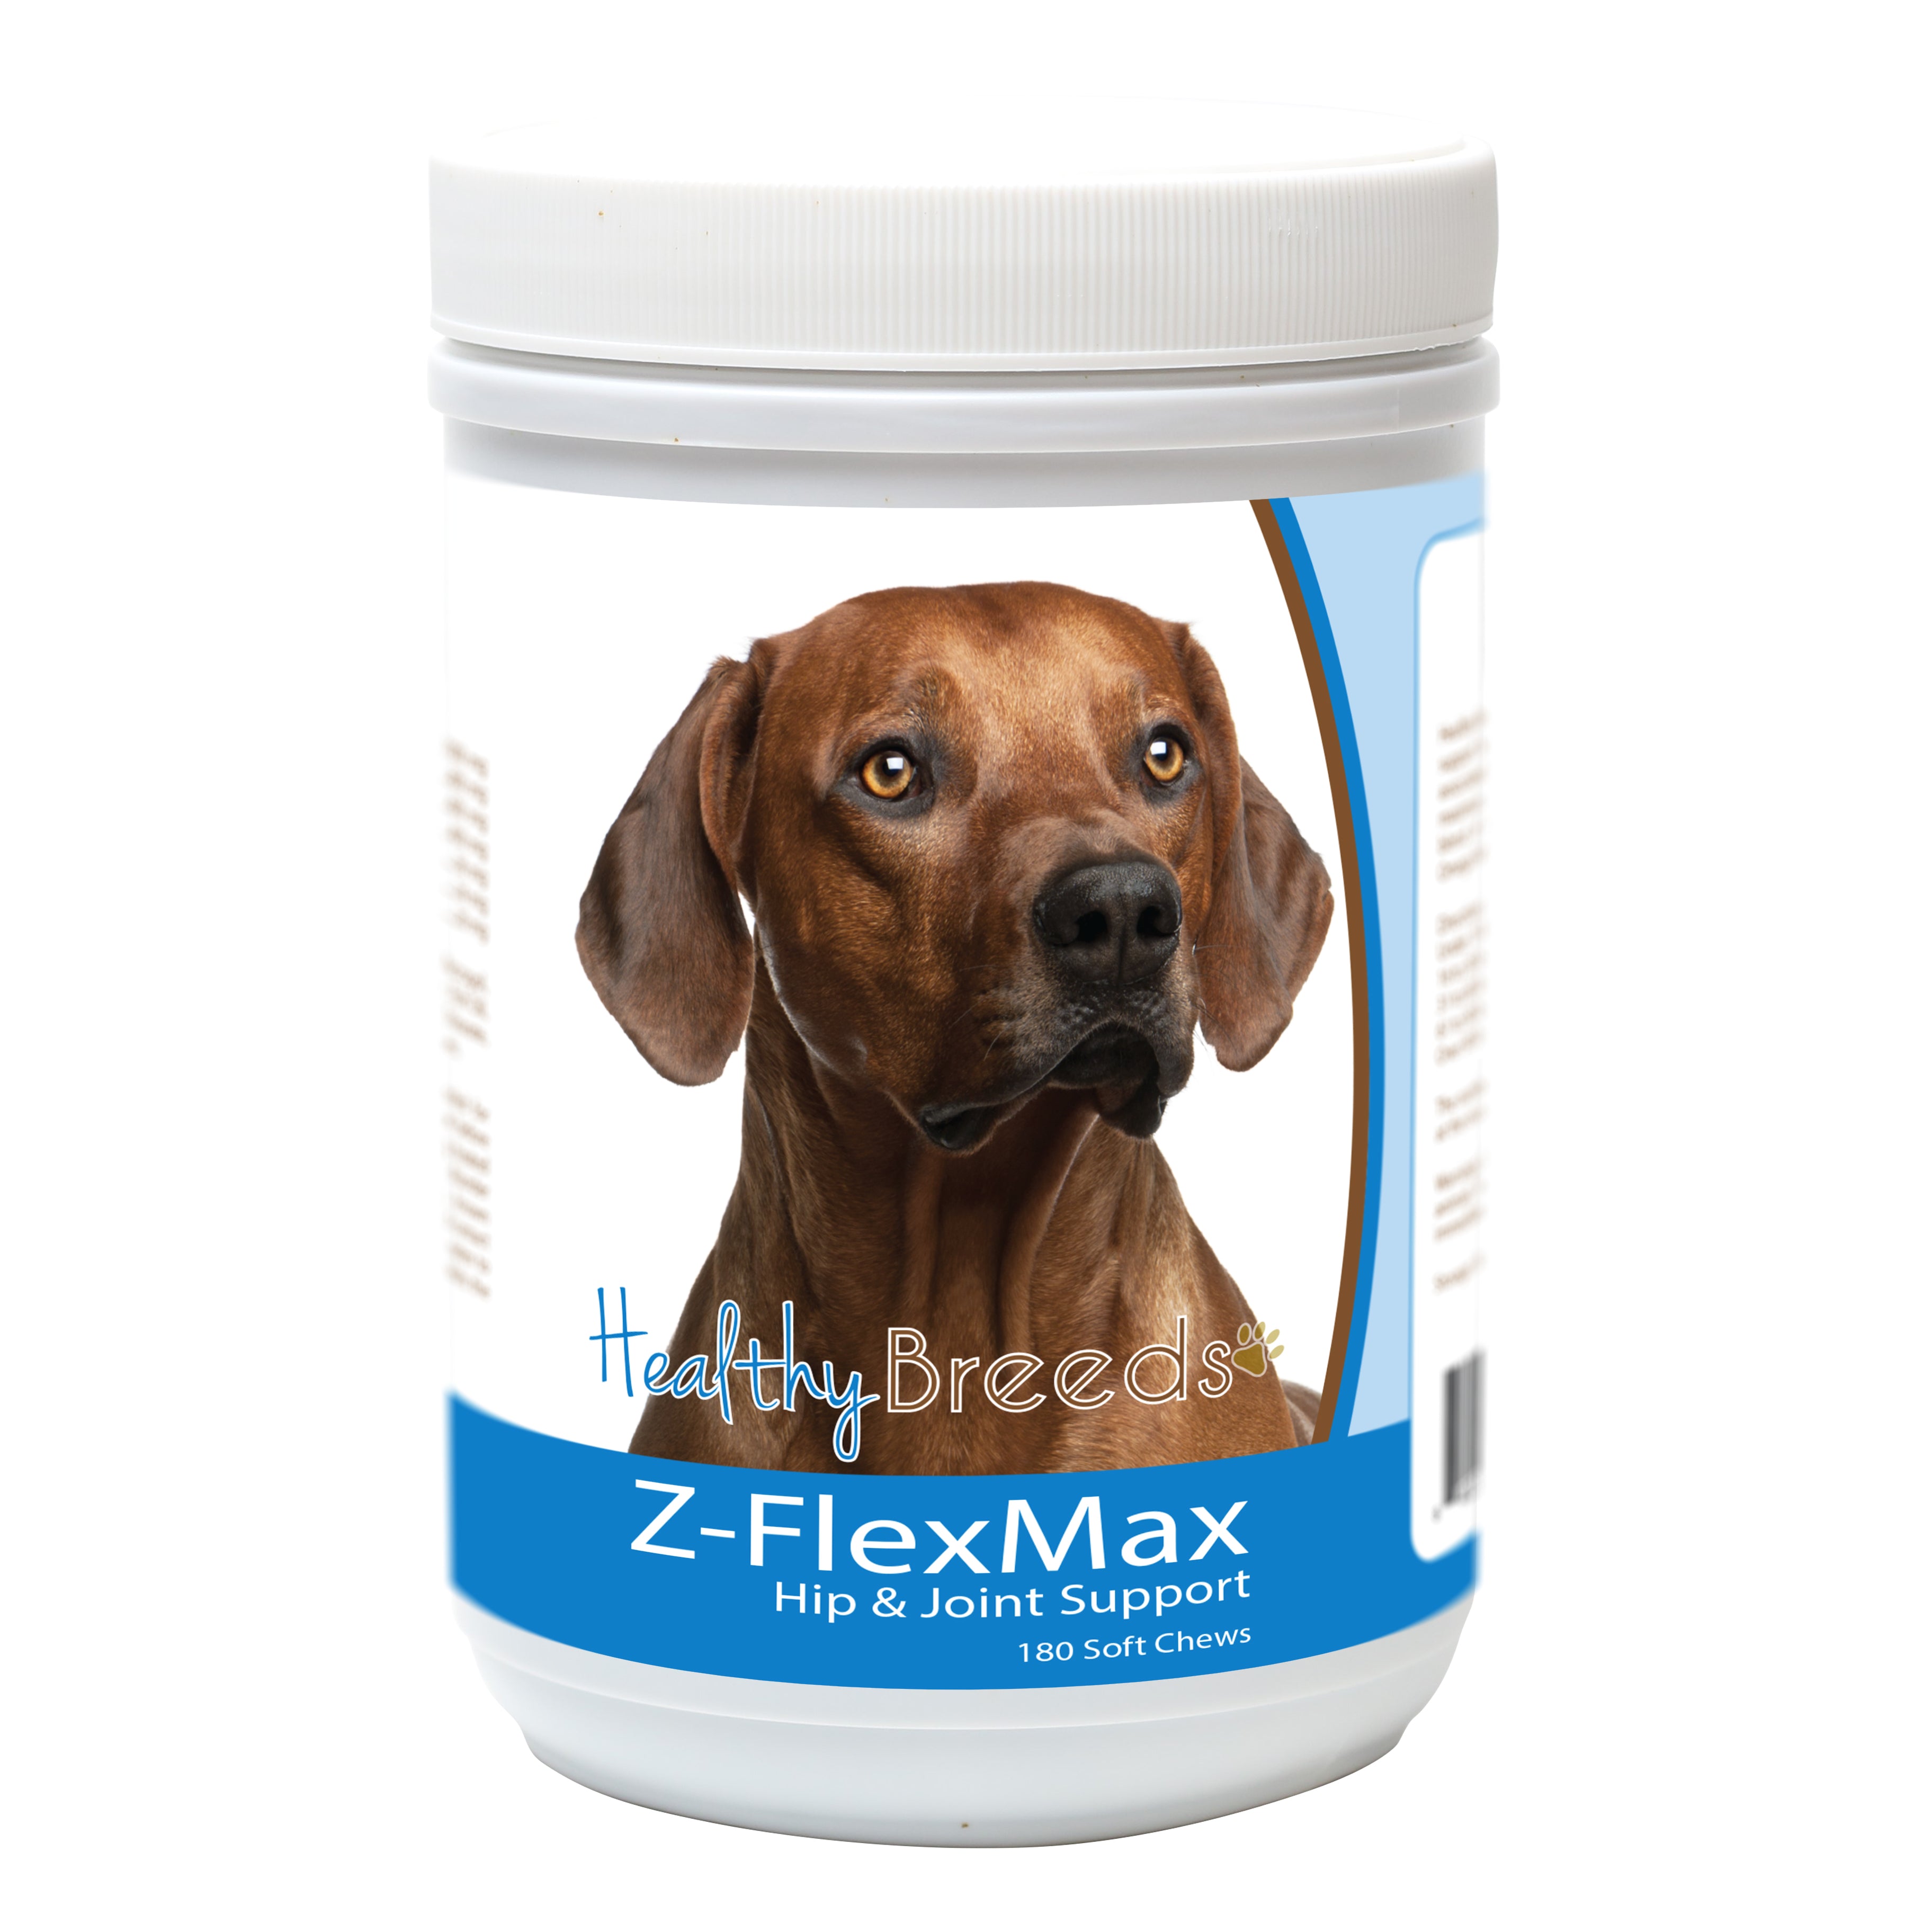 Rhodesian Ridgeback Z-Flex Max Dog Hip and Joint Support 180 Count